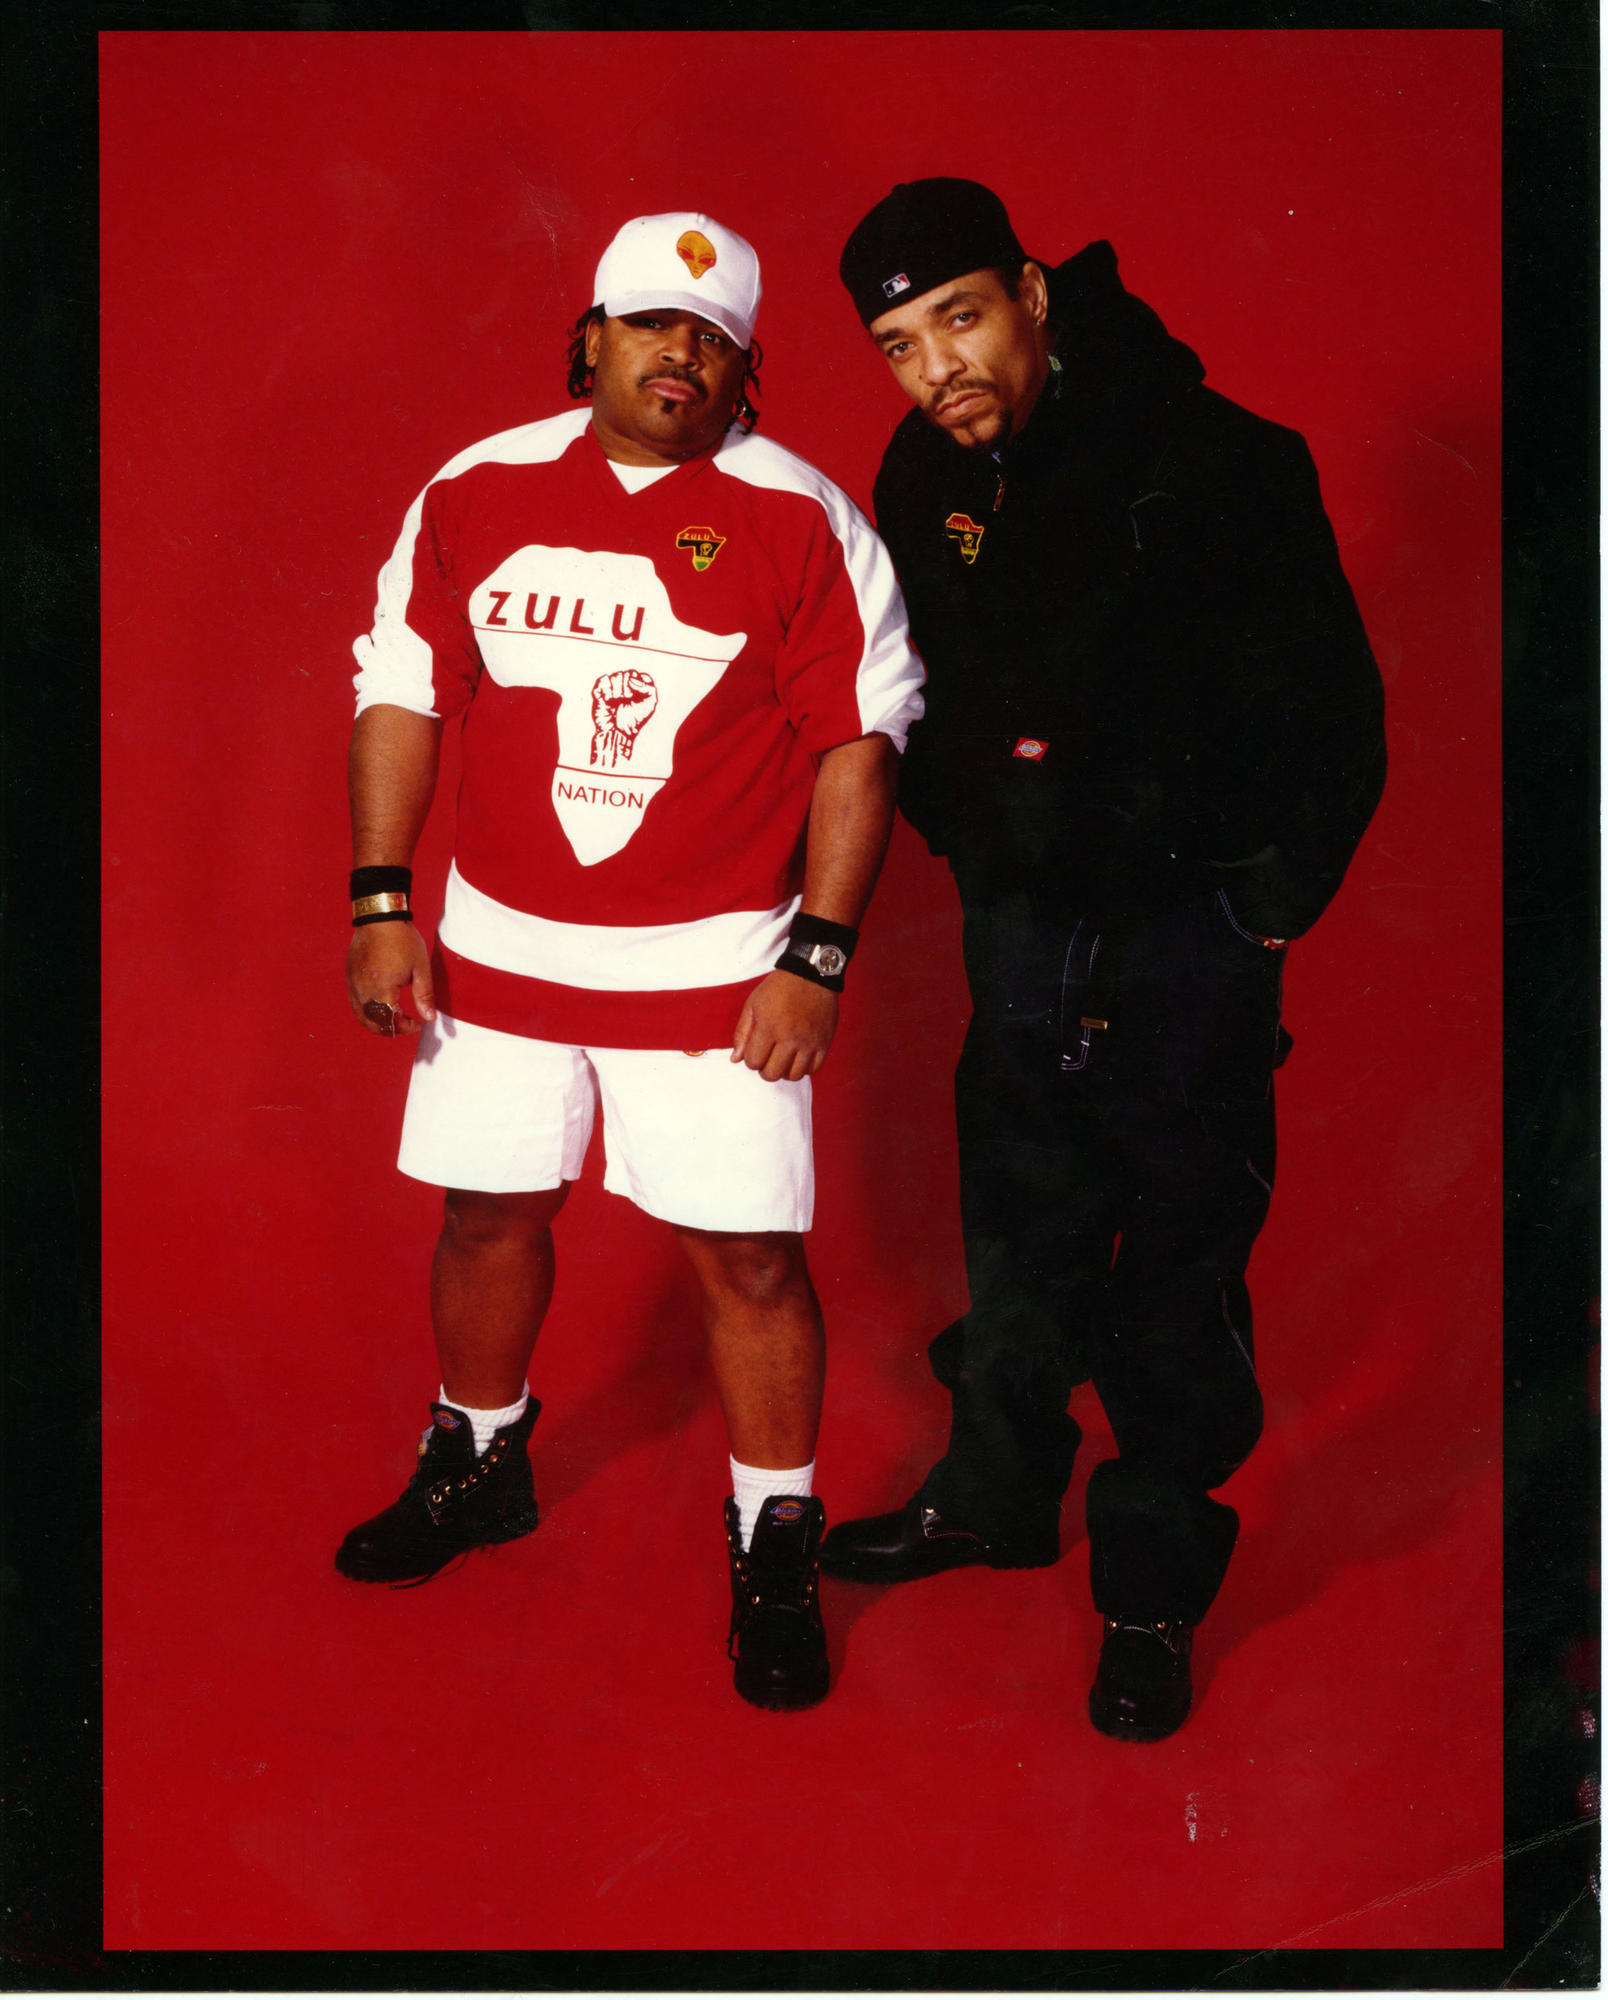  IceT and Afrika Islam photo against red background